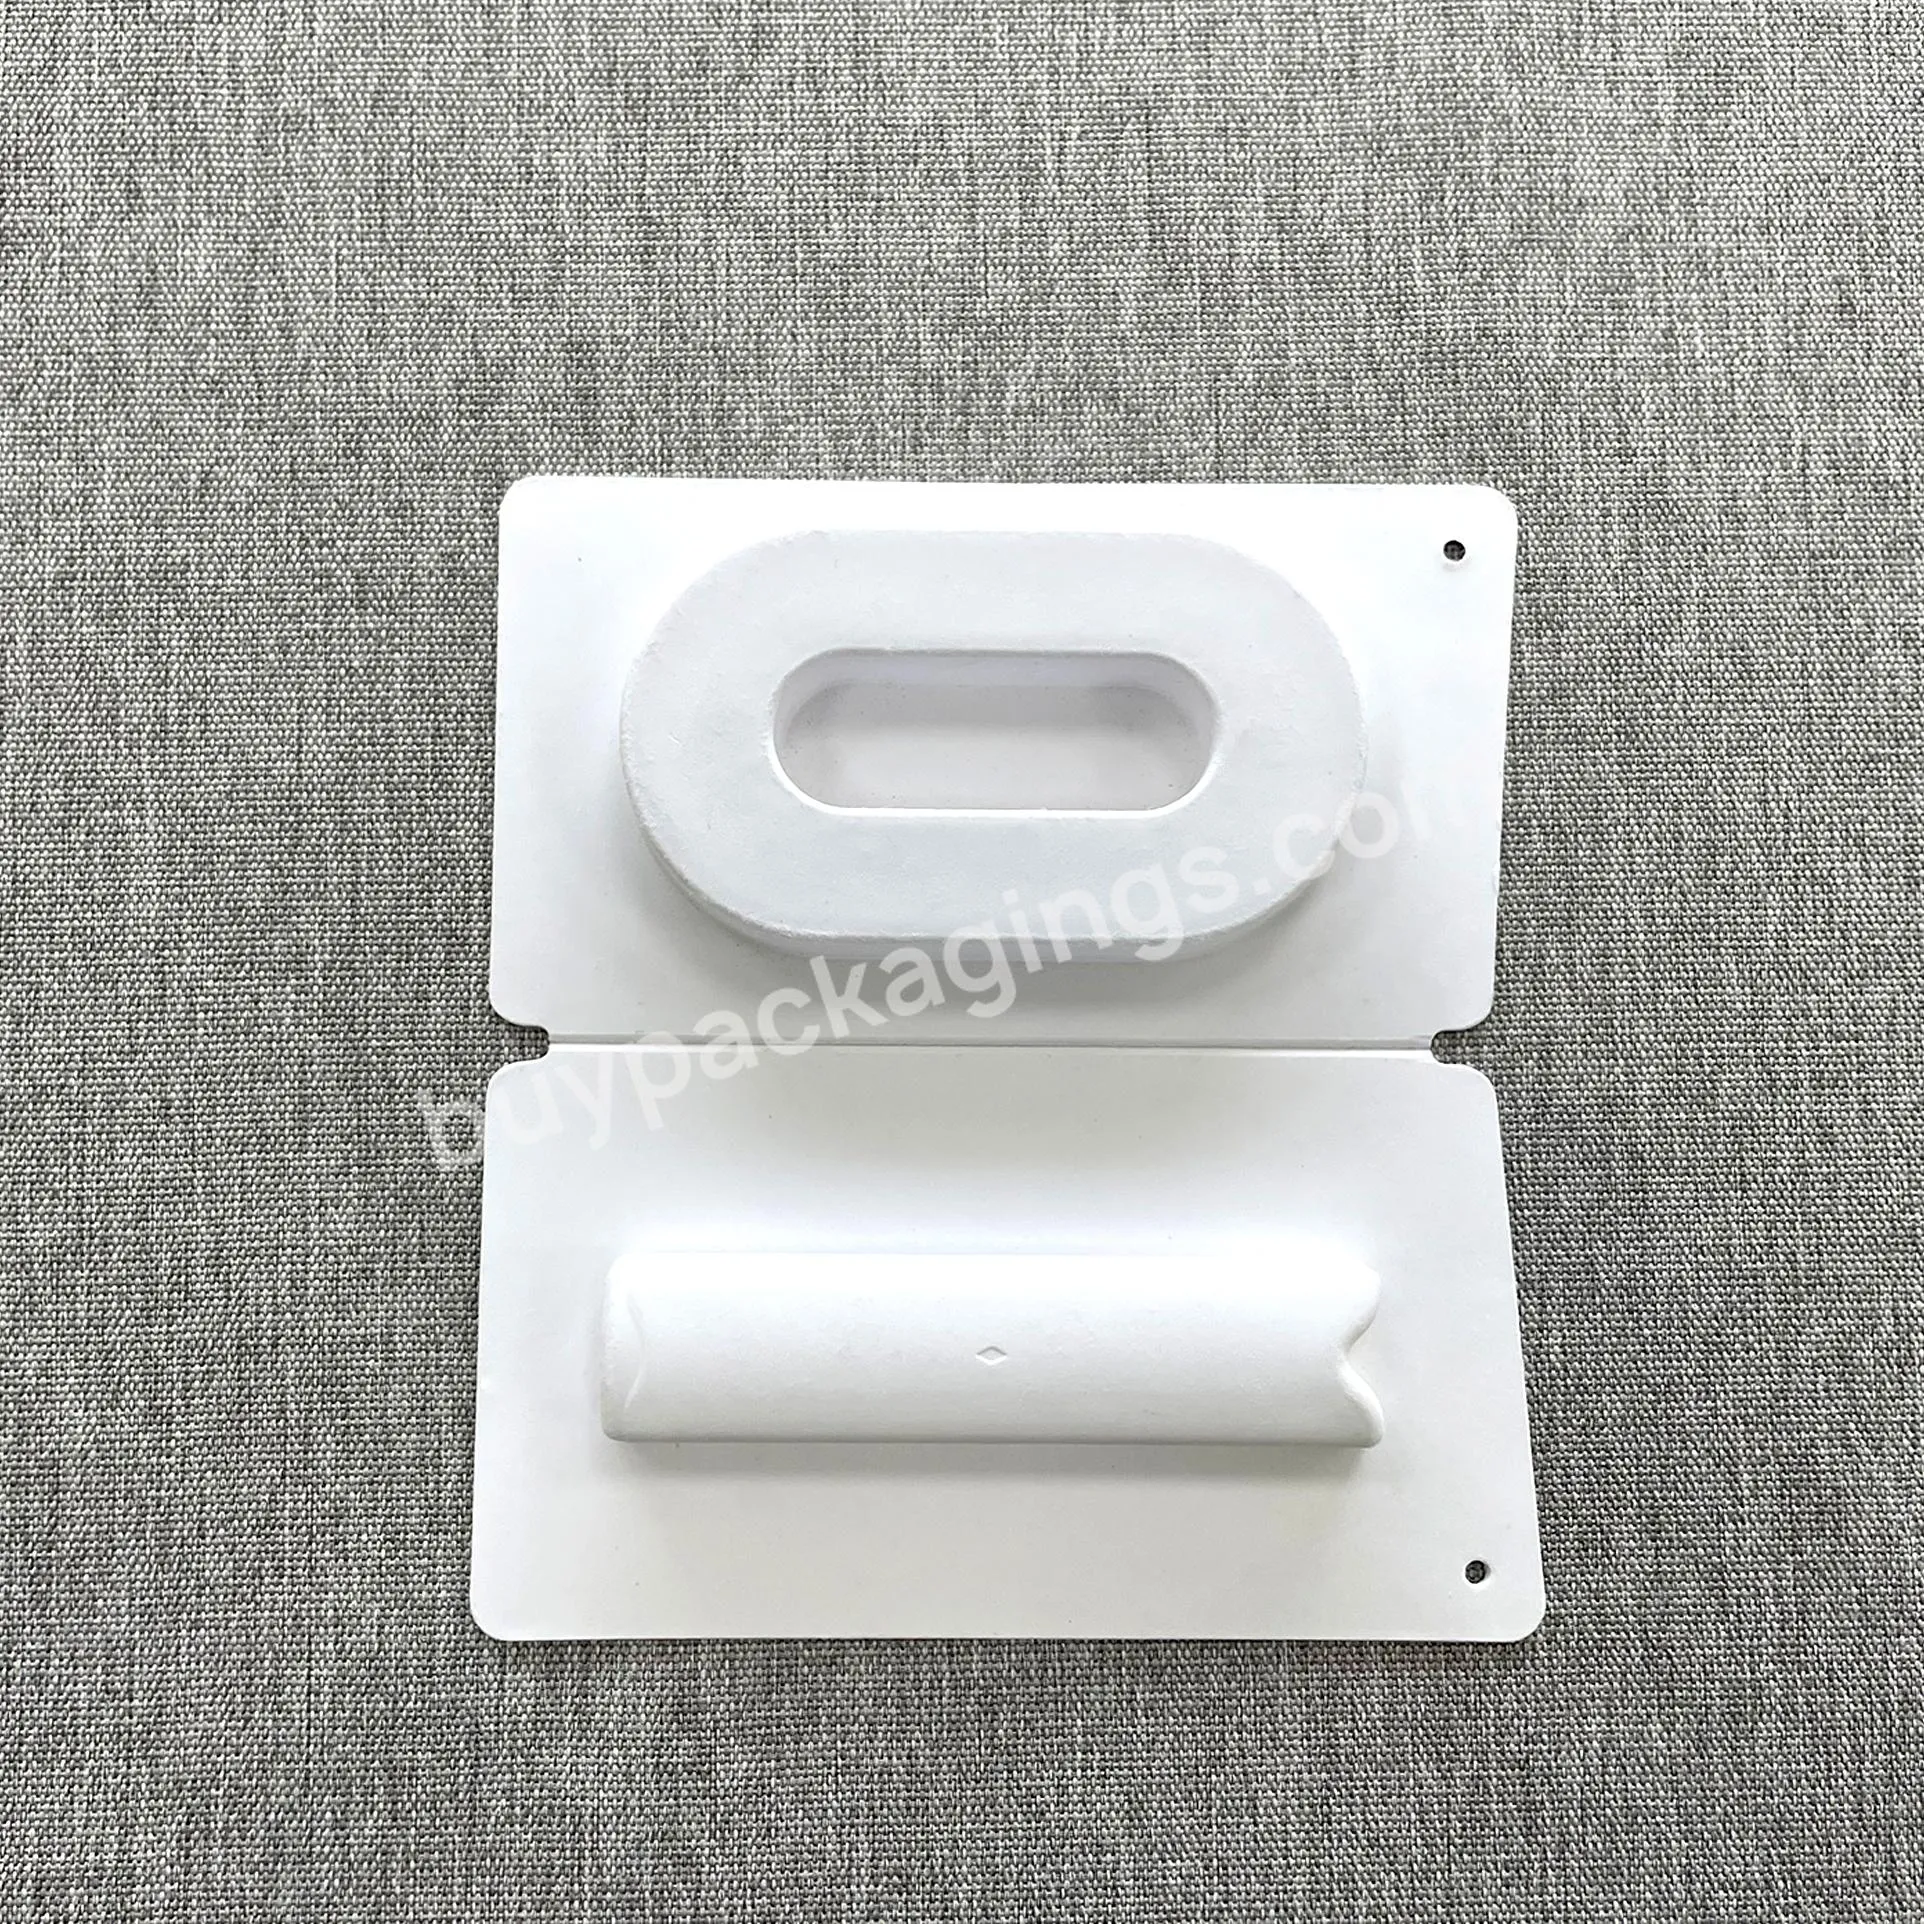 On Sale Degradable White Sustainable Disposable Recycled Cheap Paper Pulp Molded Tray Packaging - Buy Cigarette Blank Packaging,Electronic Cigarette Packaging Box,Paper Tray Pulp.